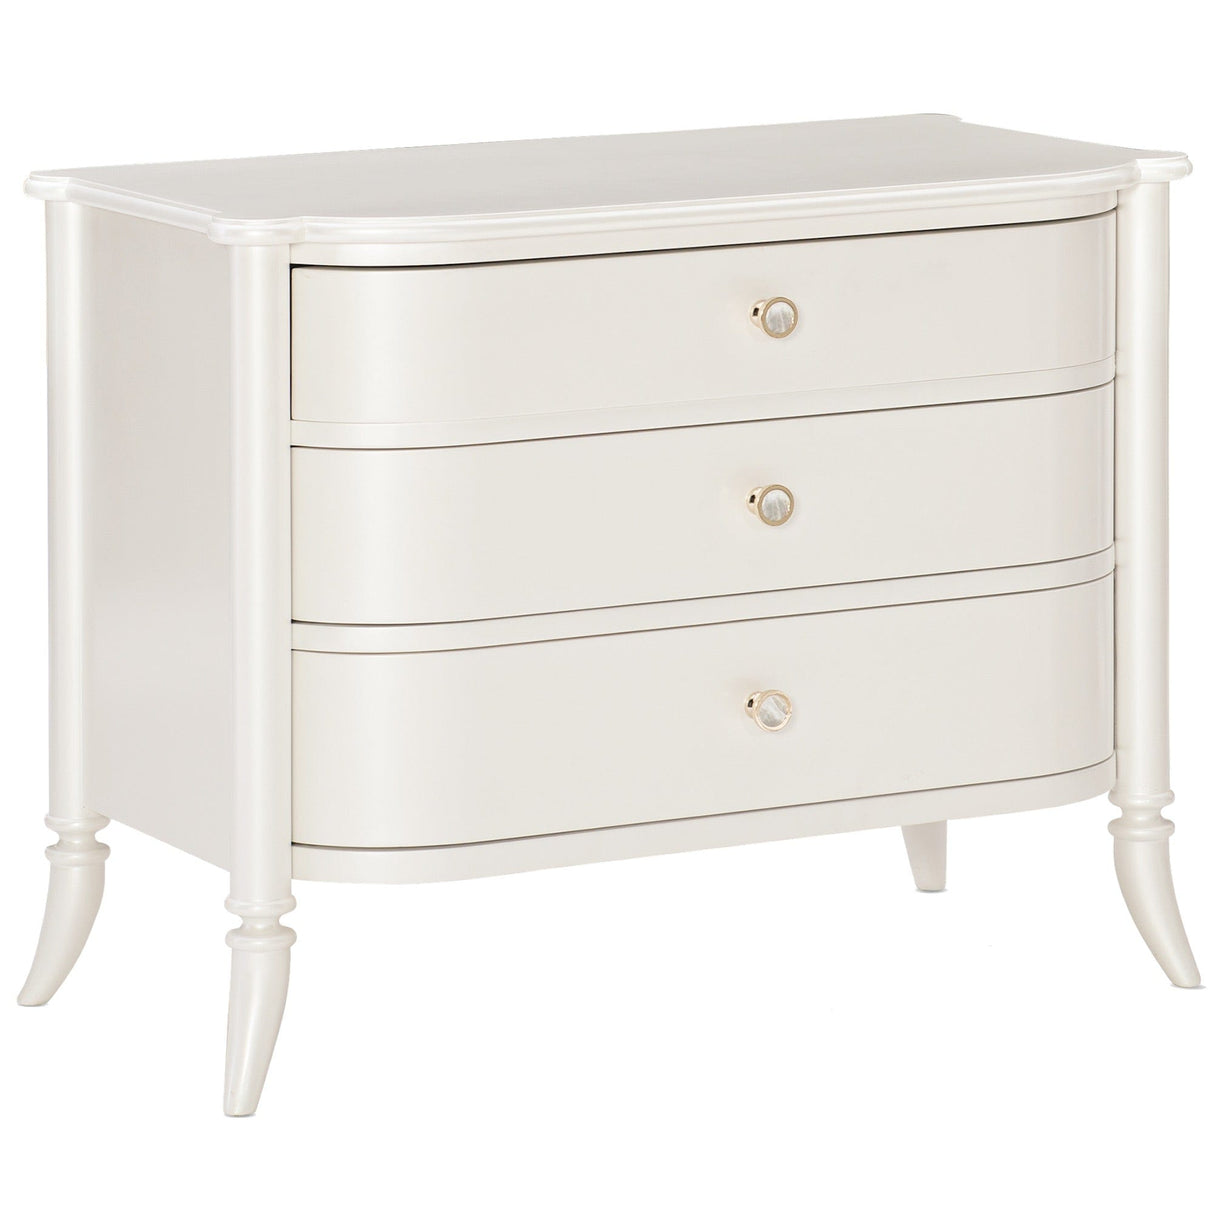 Caracole Oyster Diver Nightstand Nightstands caracole-CLA-419-068 662896028904